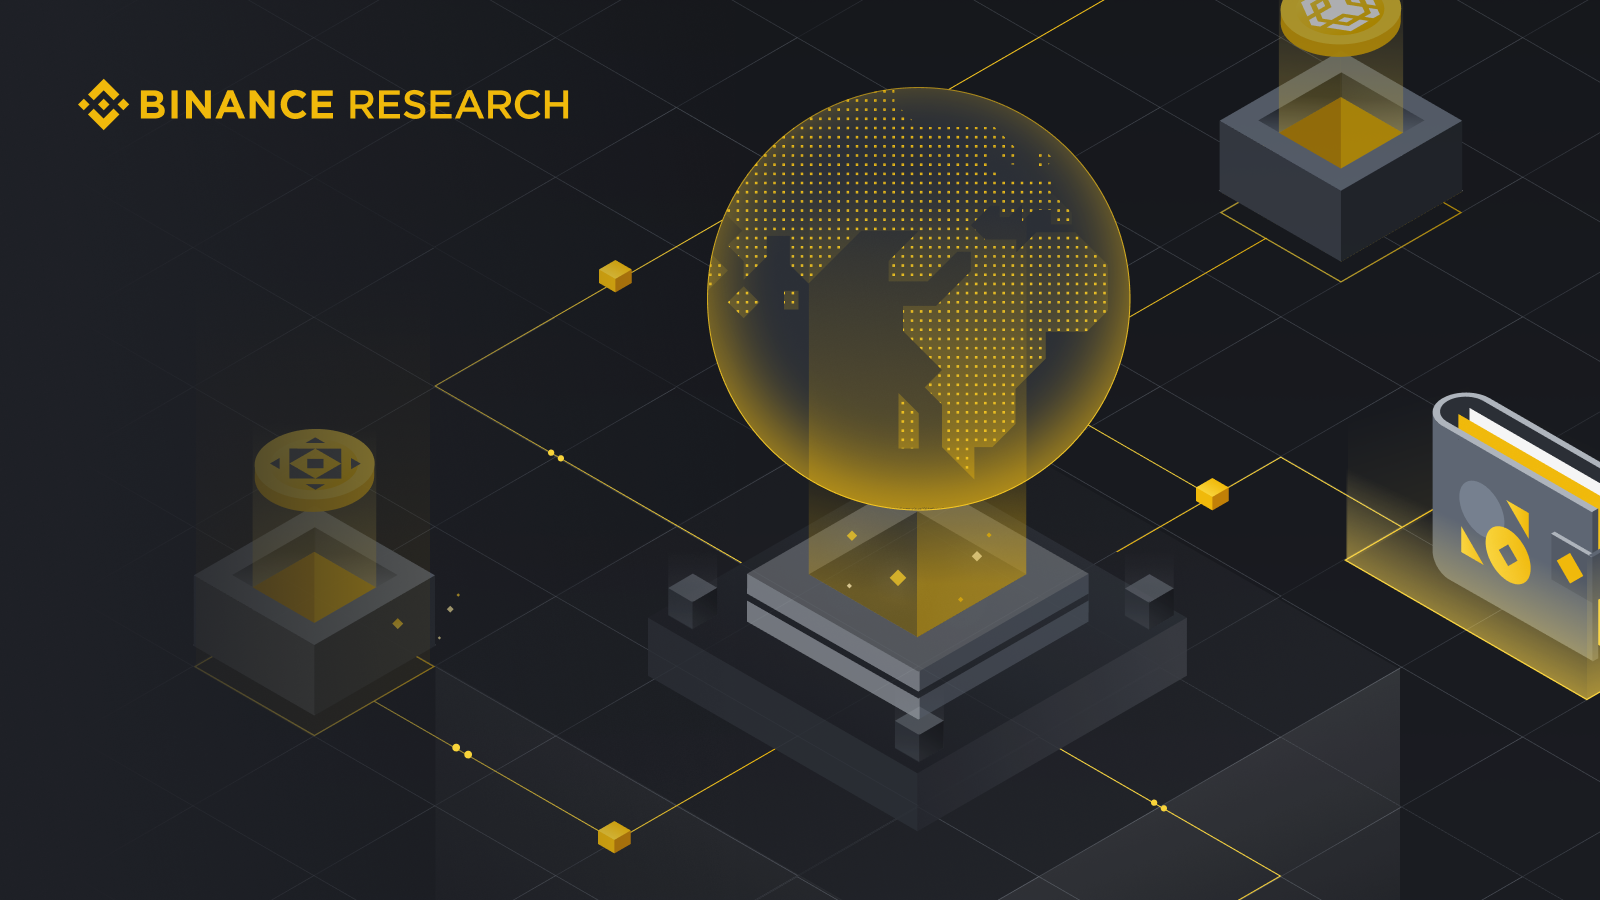 Binance Research: Examining the State of Real-World Assets